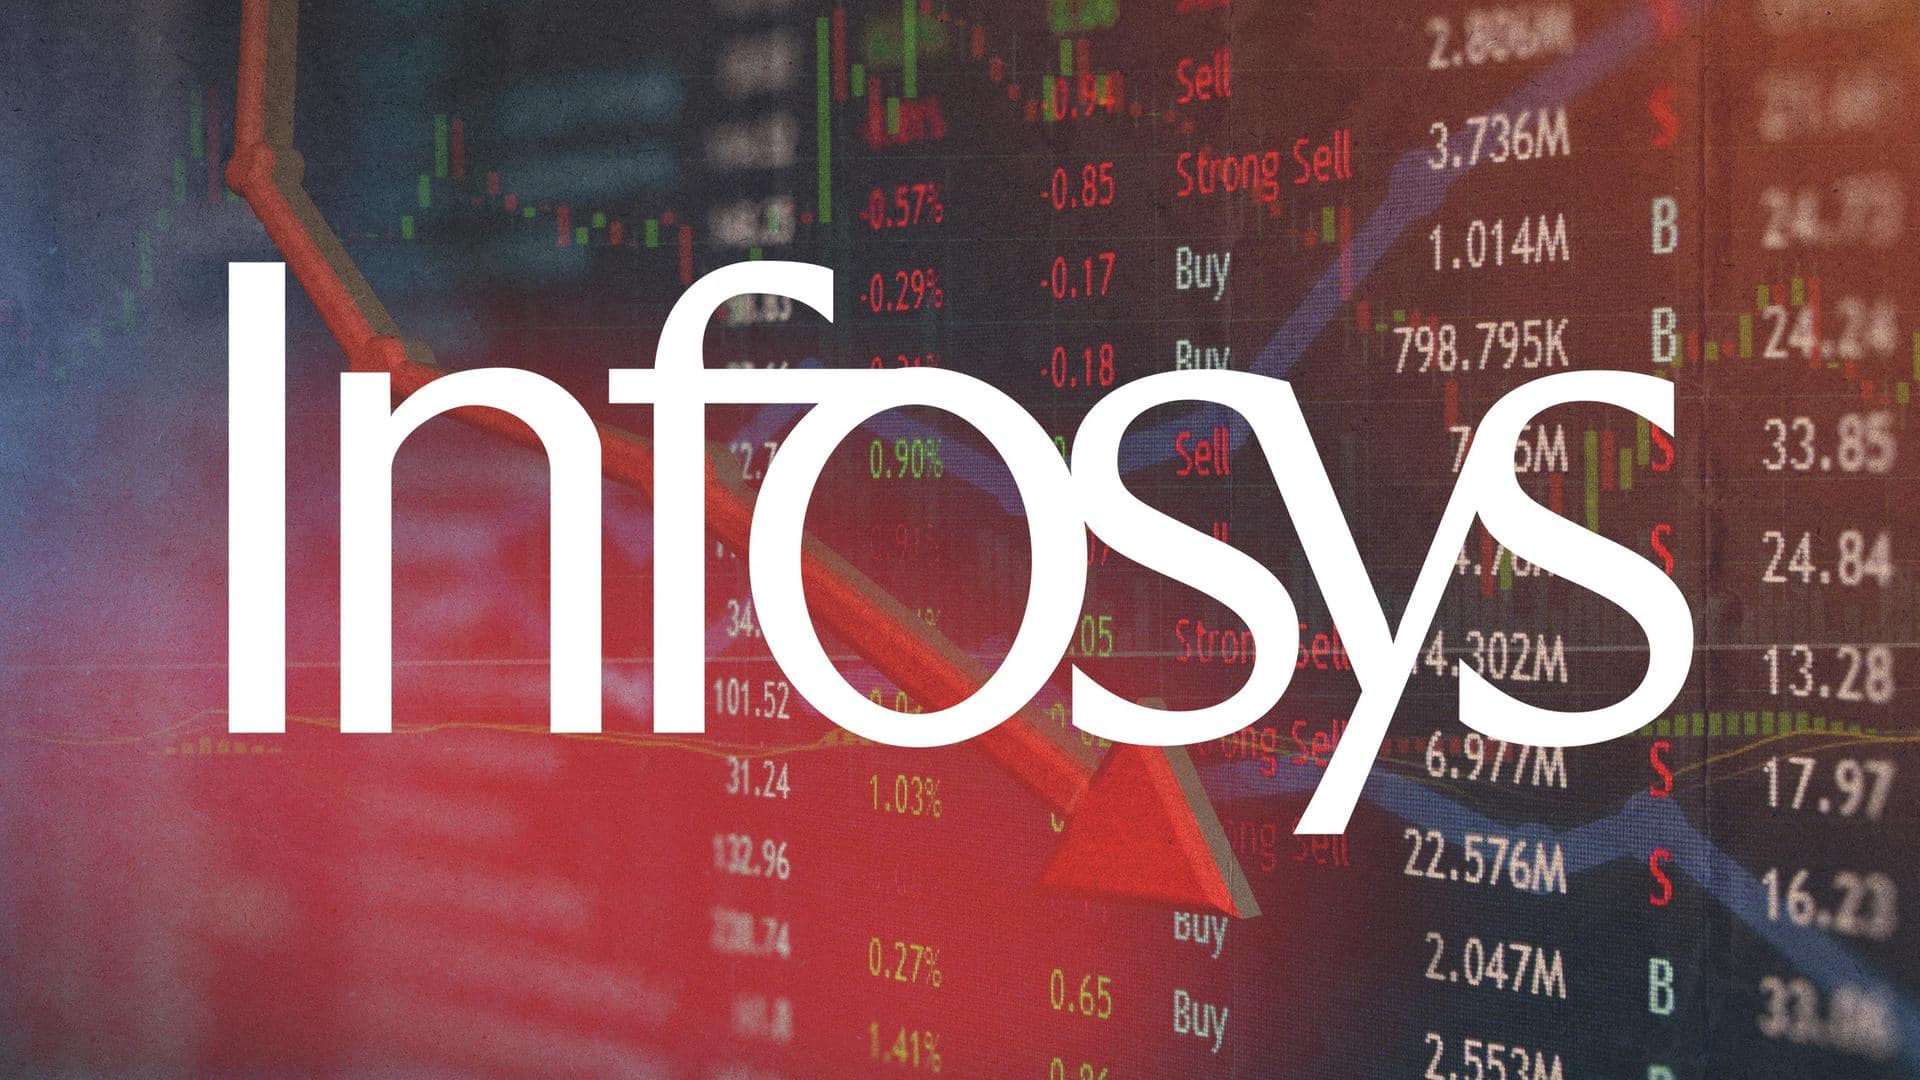 Infosys shares plummet as much as 10%: Here's what happened